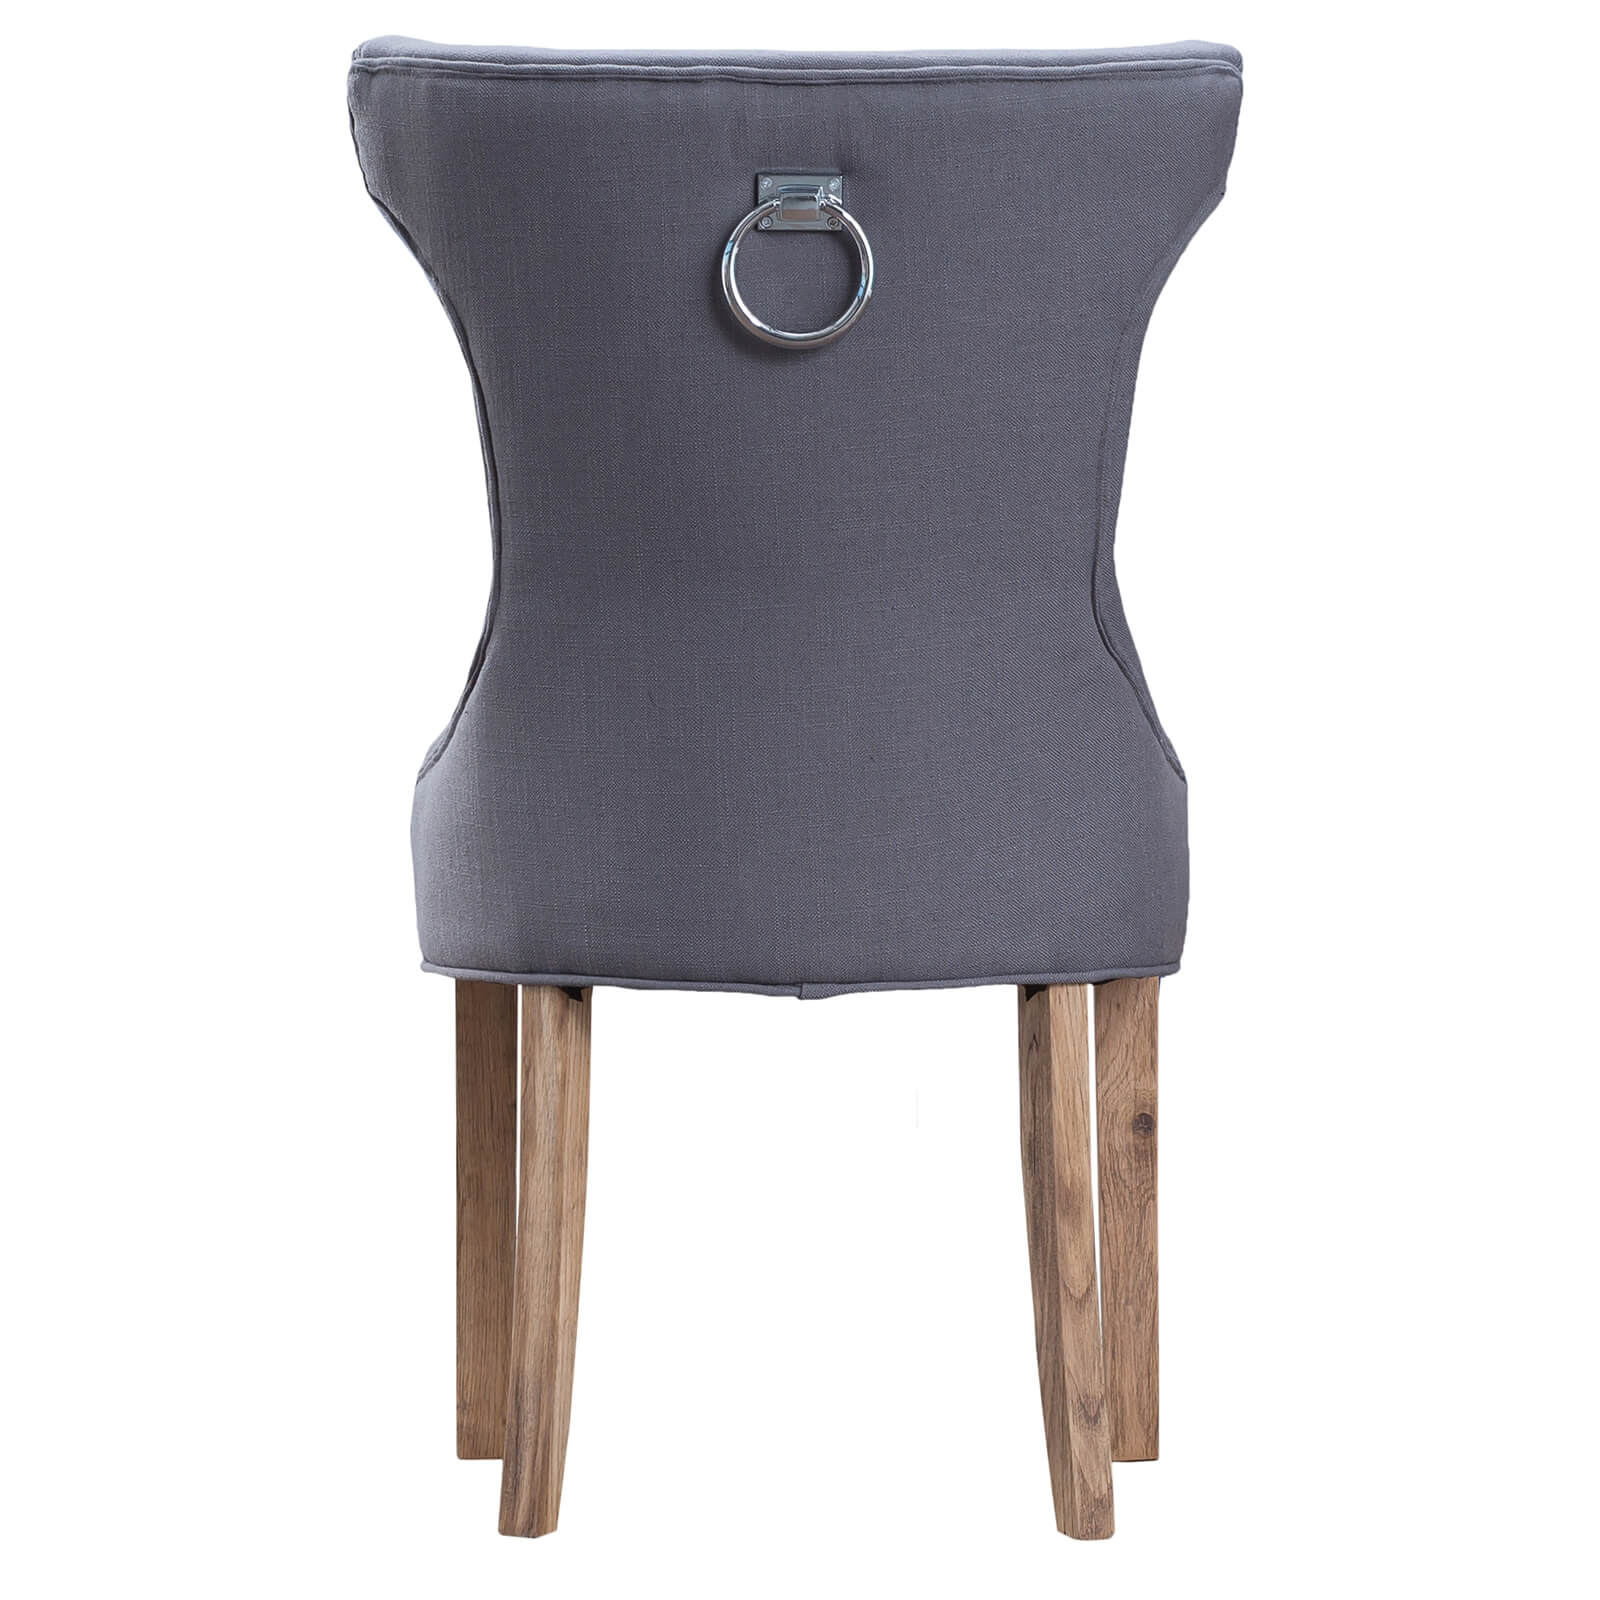 Winged Button Back Dining Chair - Set of 2 - Grey